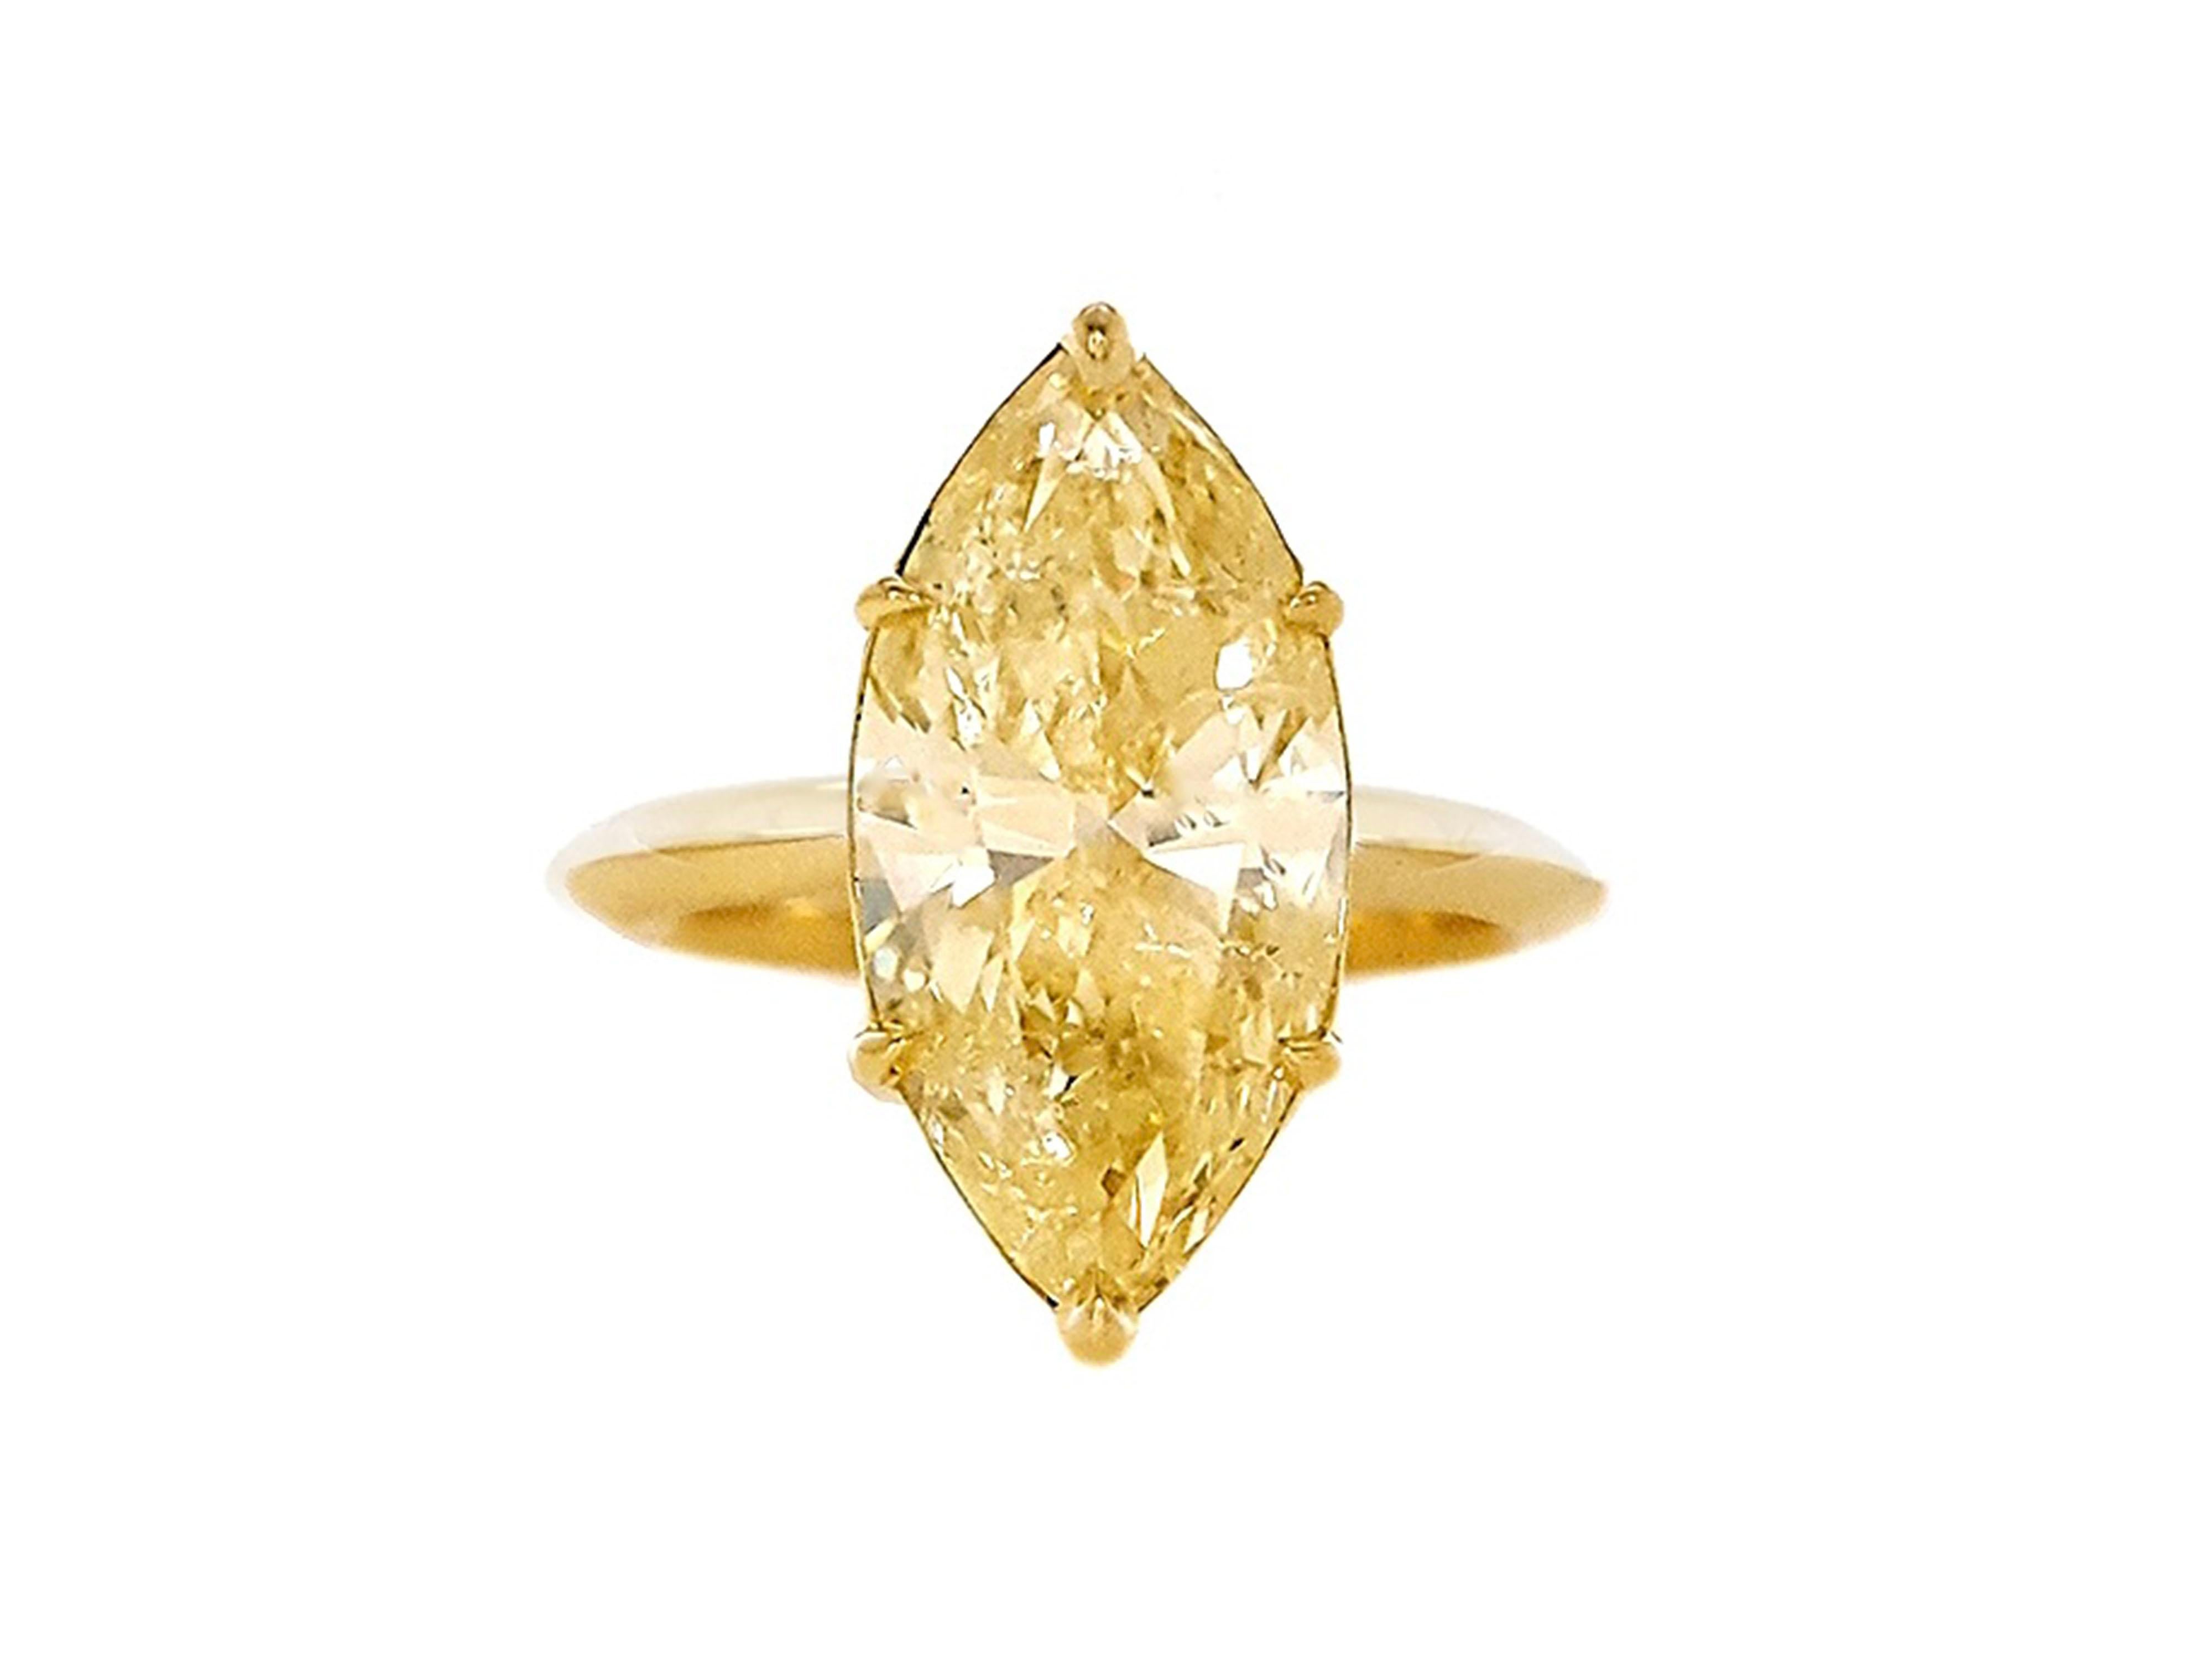 Absolutely stunning engagement ring style features a 5.18 Carat Fancy Yellow, Marquee Cut Diamond that sparkles and shines with every movement. Set in 18K Gold Engagement Ring certified by GIA. The handcrafted setting adds a beautiful yellowish